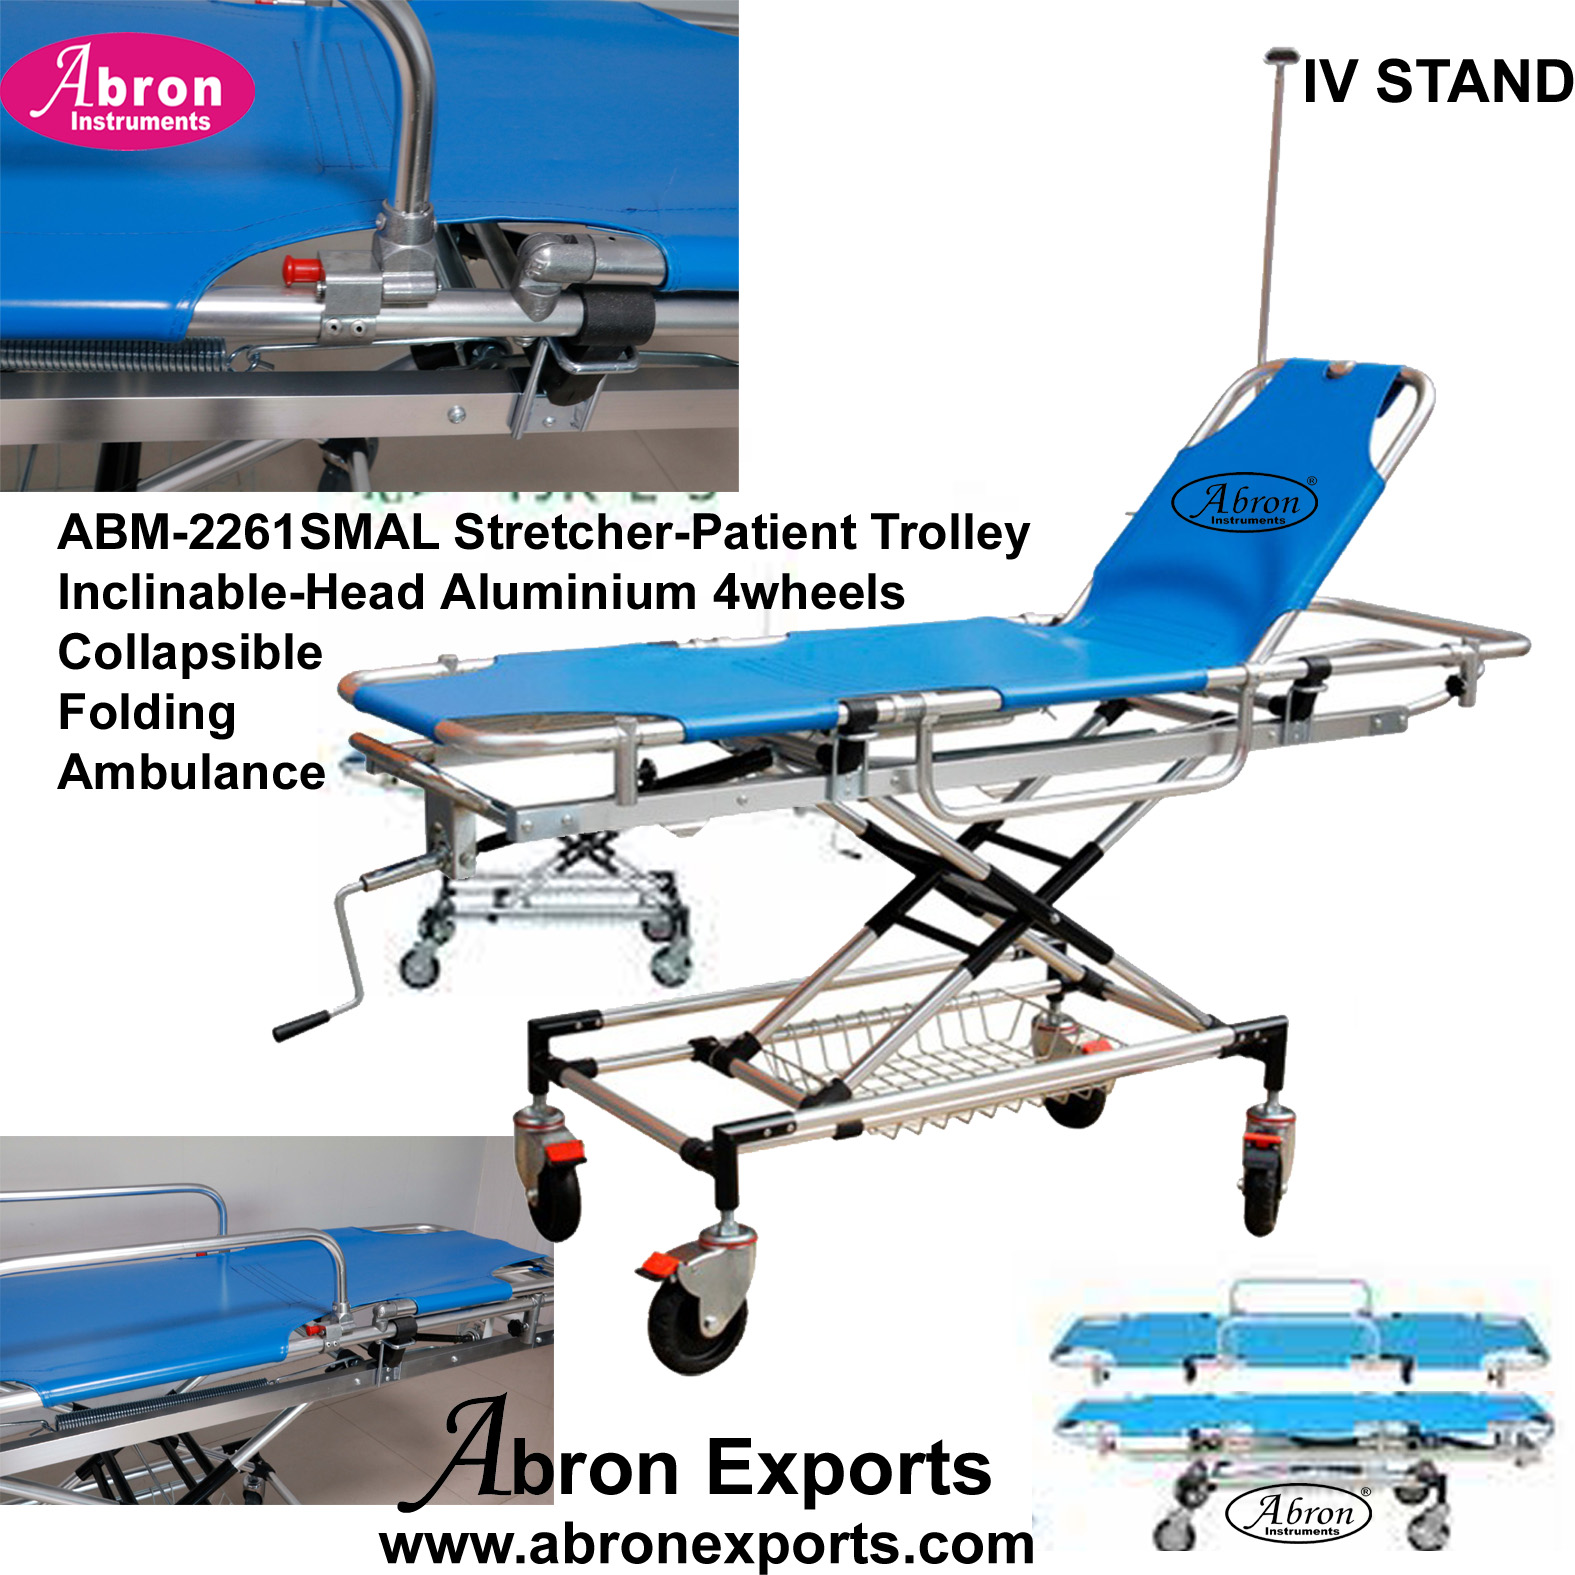 Patient Trolley Stretcher trolley Aluminium with 4 wheel Collapsible Medical Use Folding Ambulance Abron ABM-2261SMAL